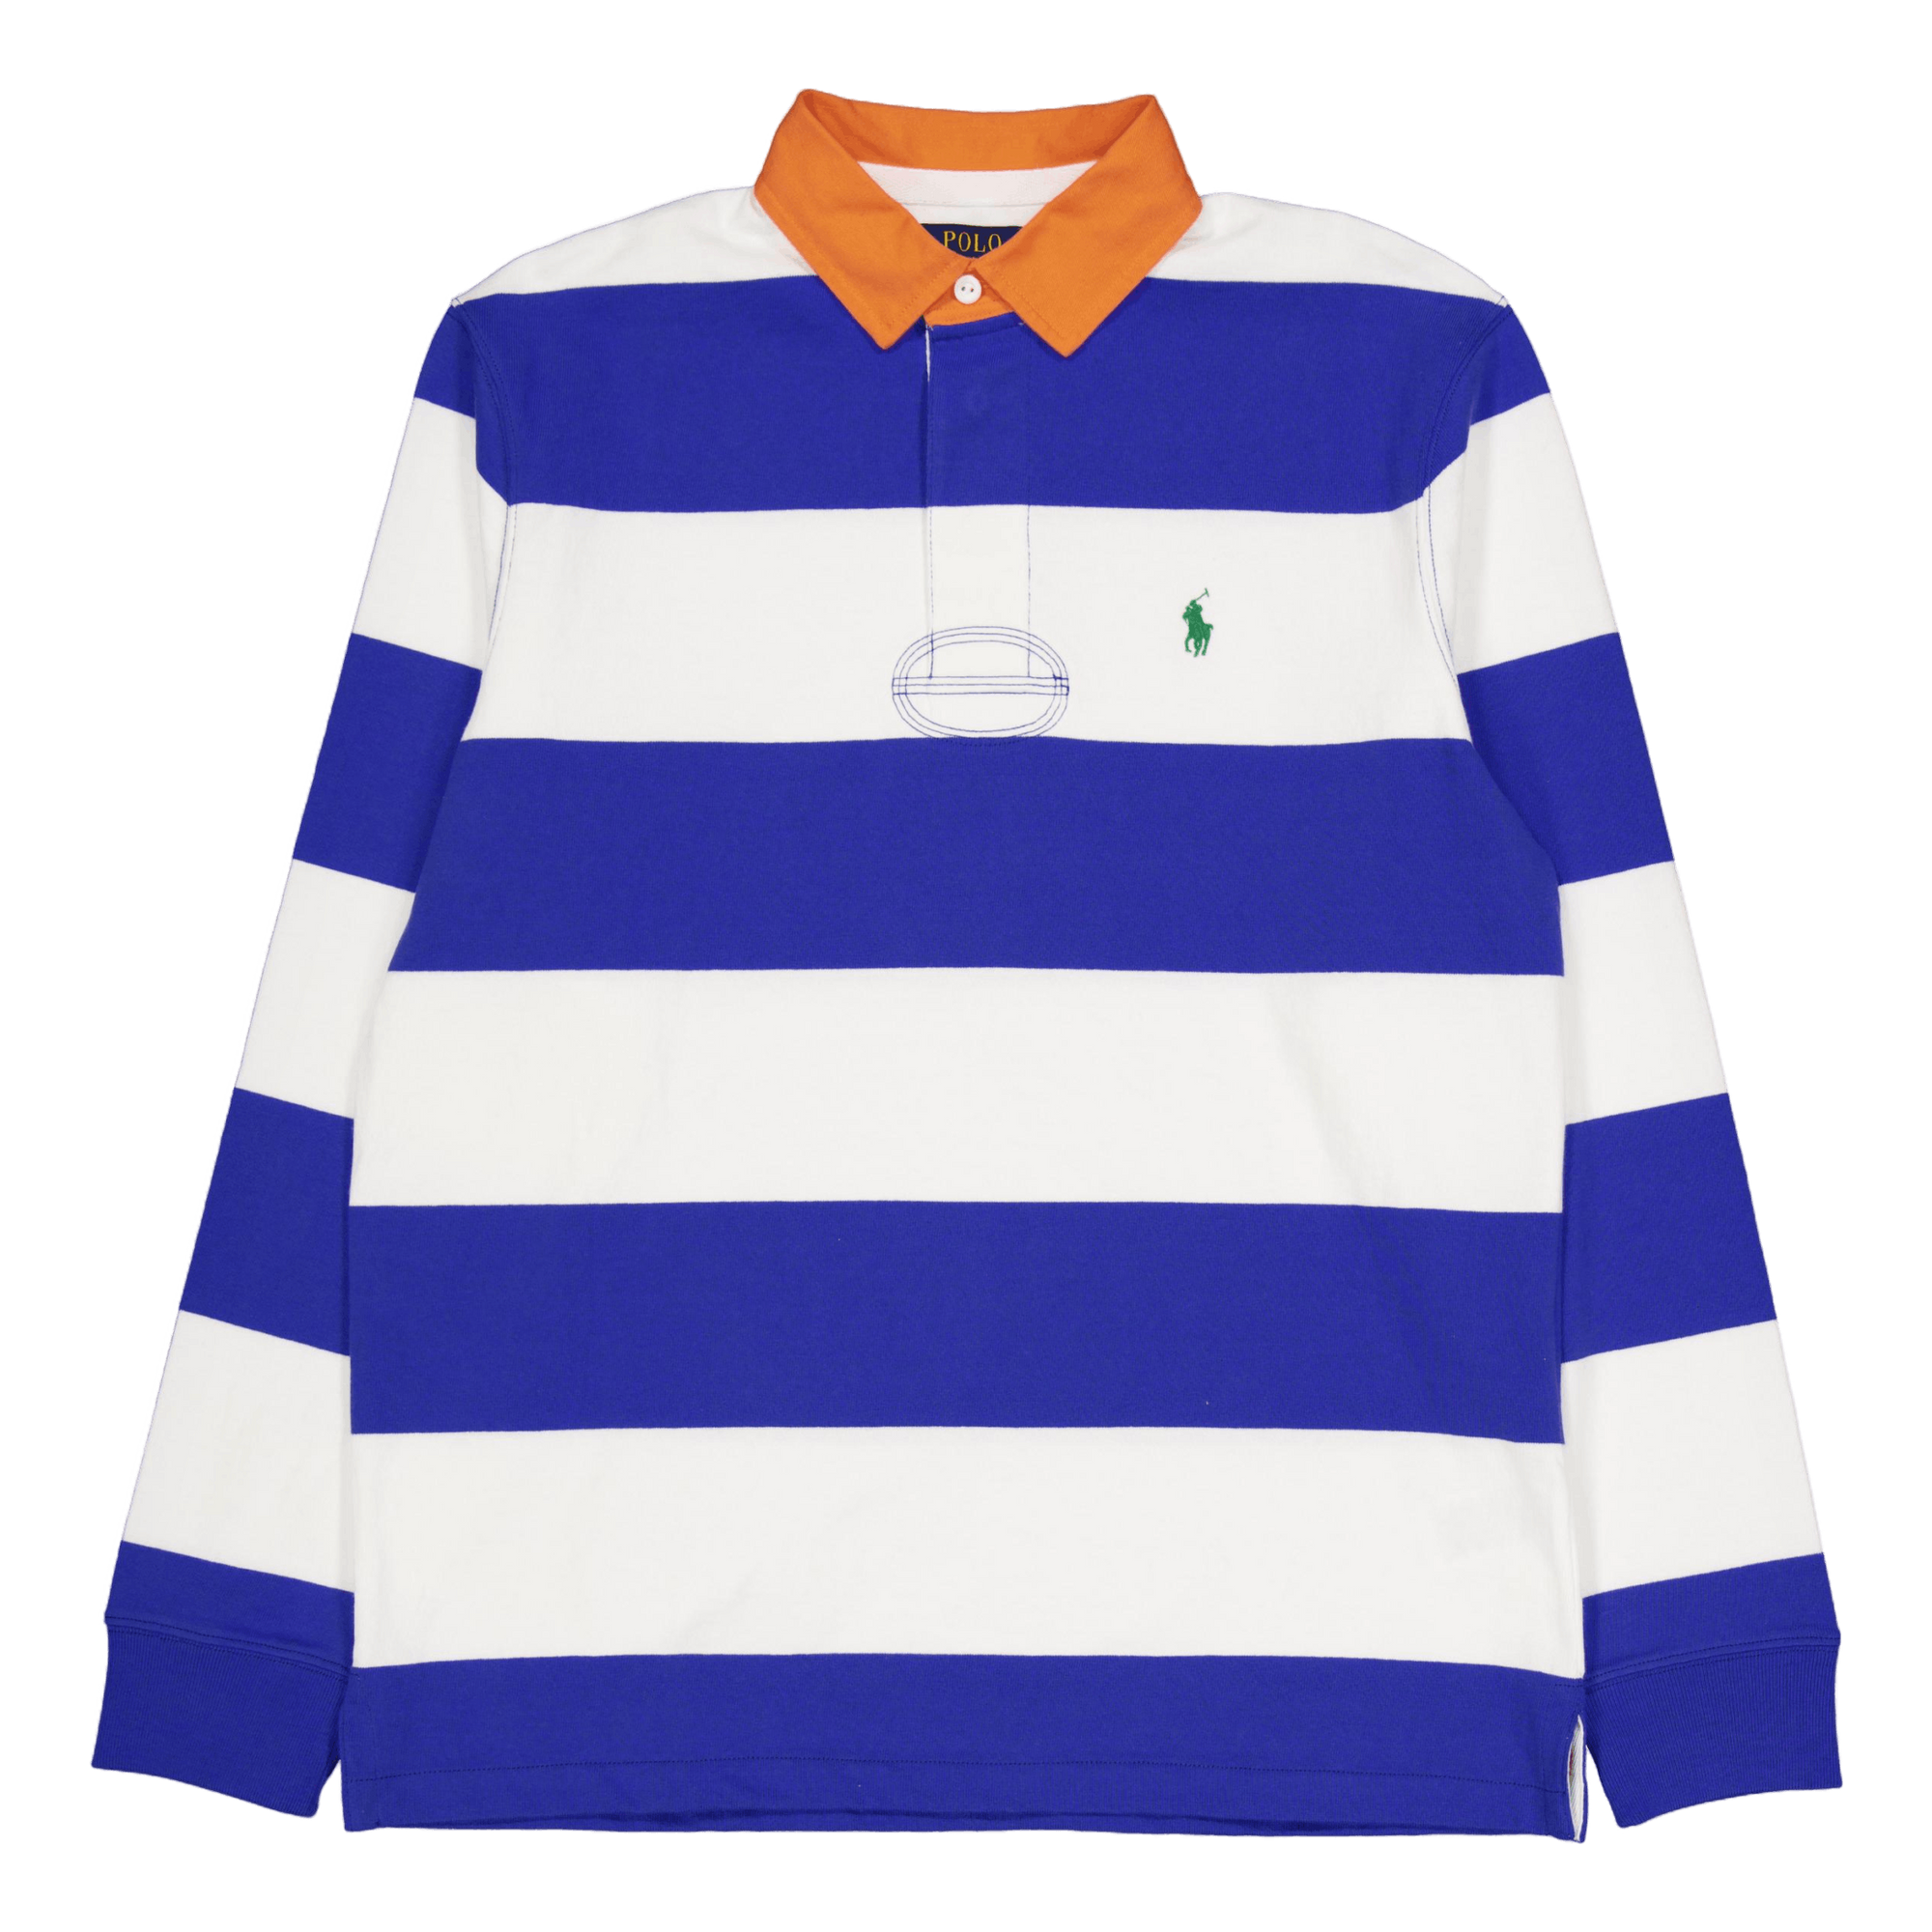 Classic Fit Striped Jersey Rugby Shirt New Iris Blue / White